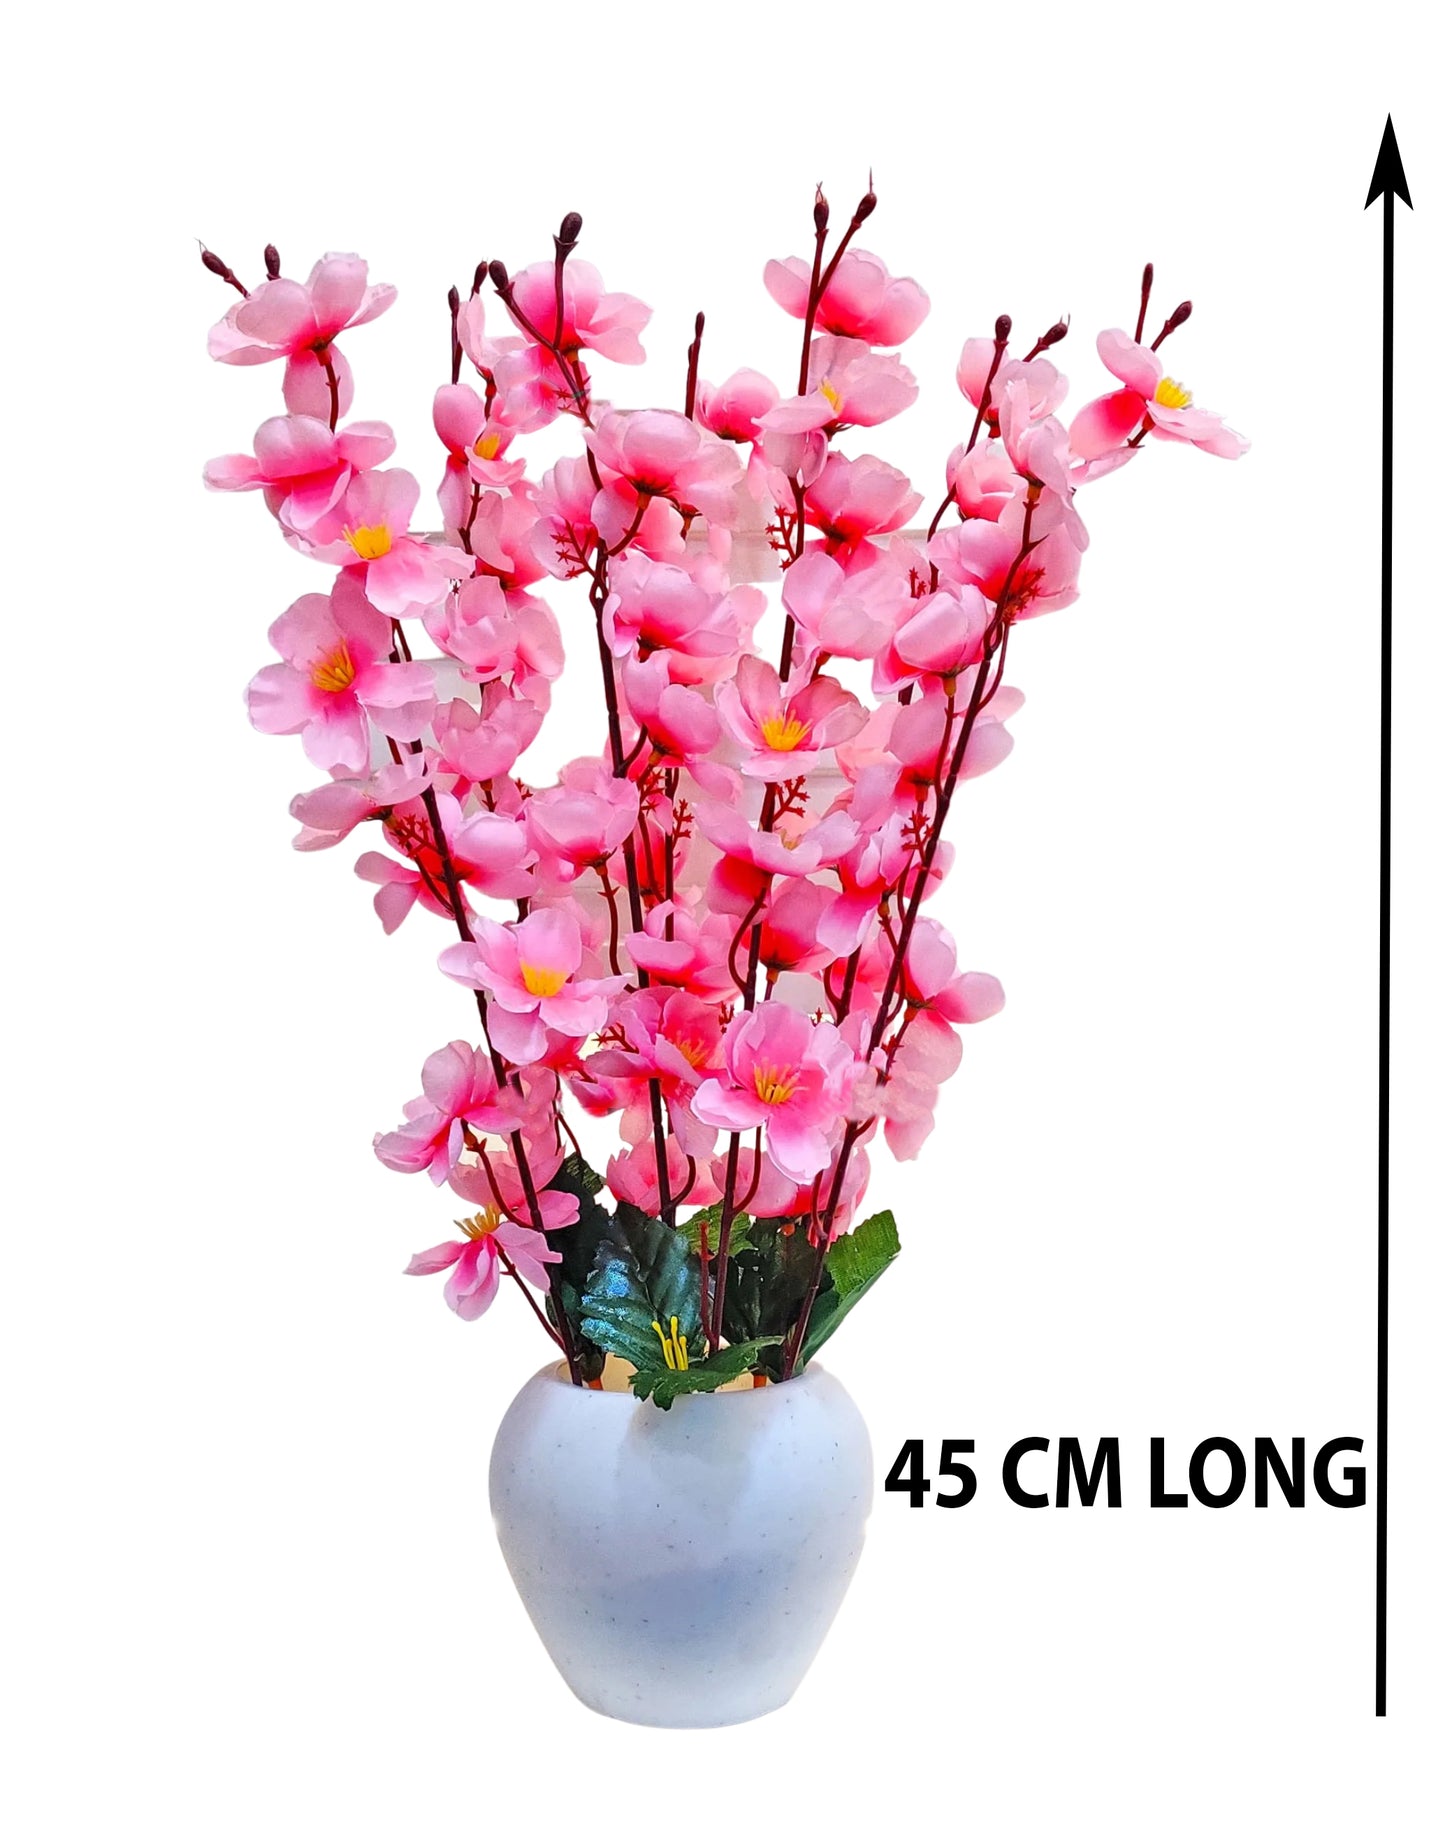 ARTSY® Artificial Flowers With Pot For Home Decoration, Office Decor Cherry Blossom combo, baypink, 1 Piece